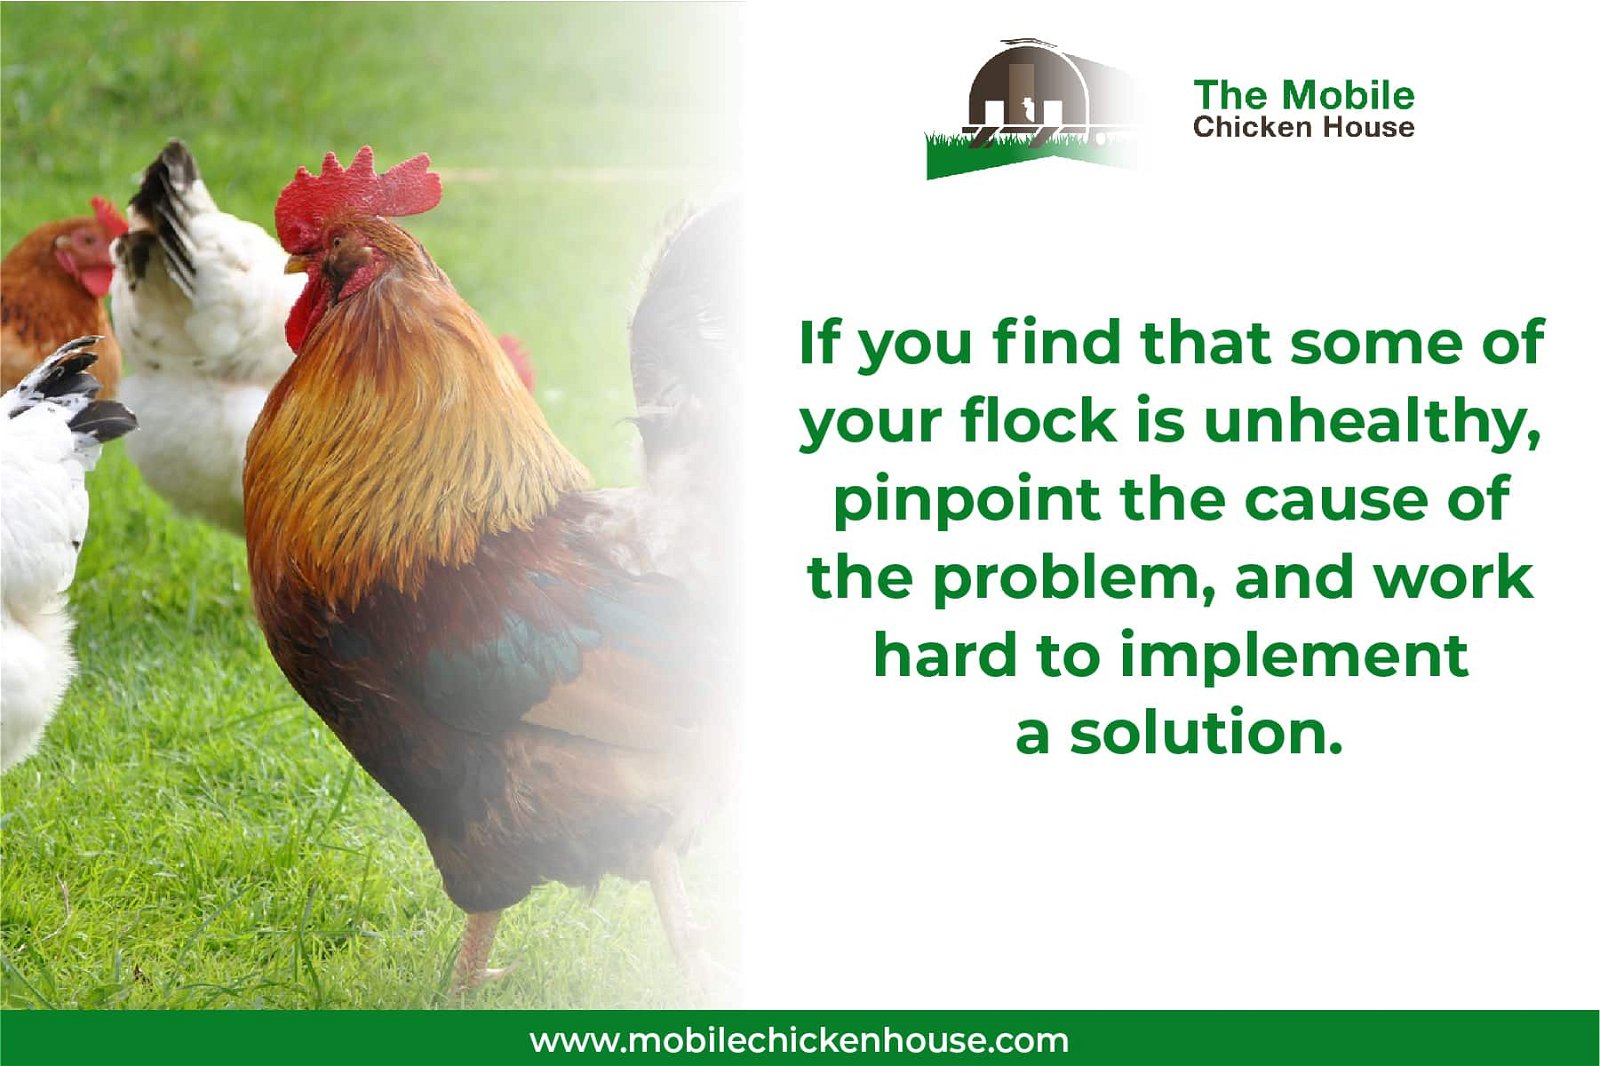 if your chickens are unhealthy, find and fix the problem